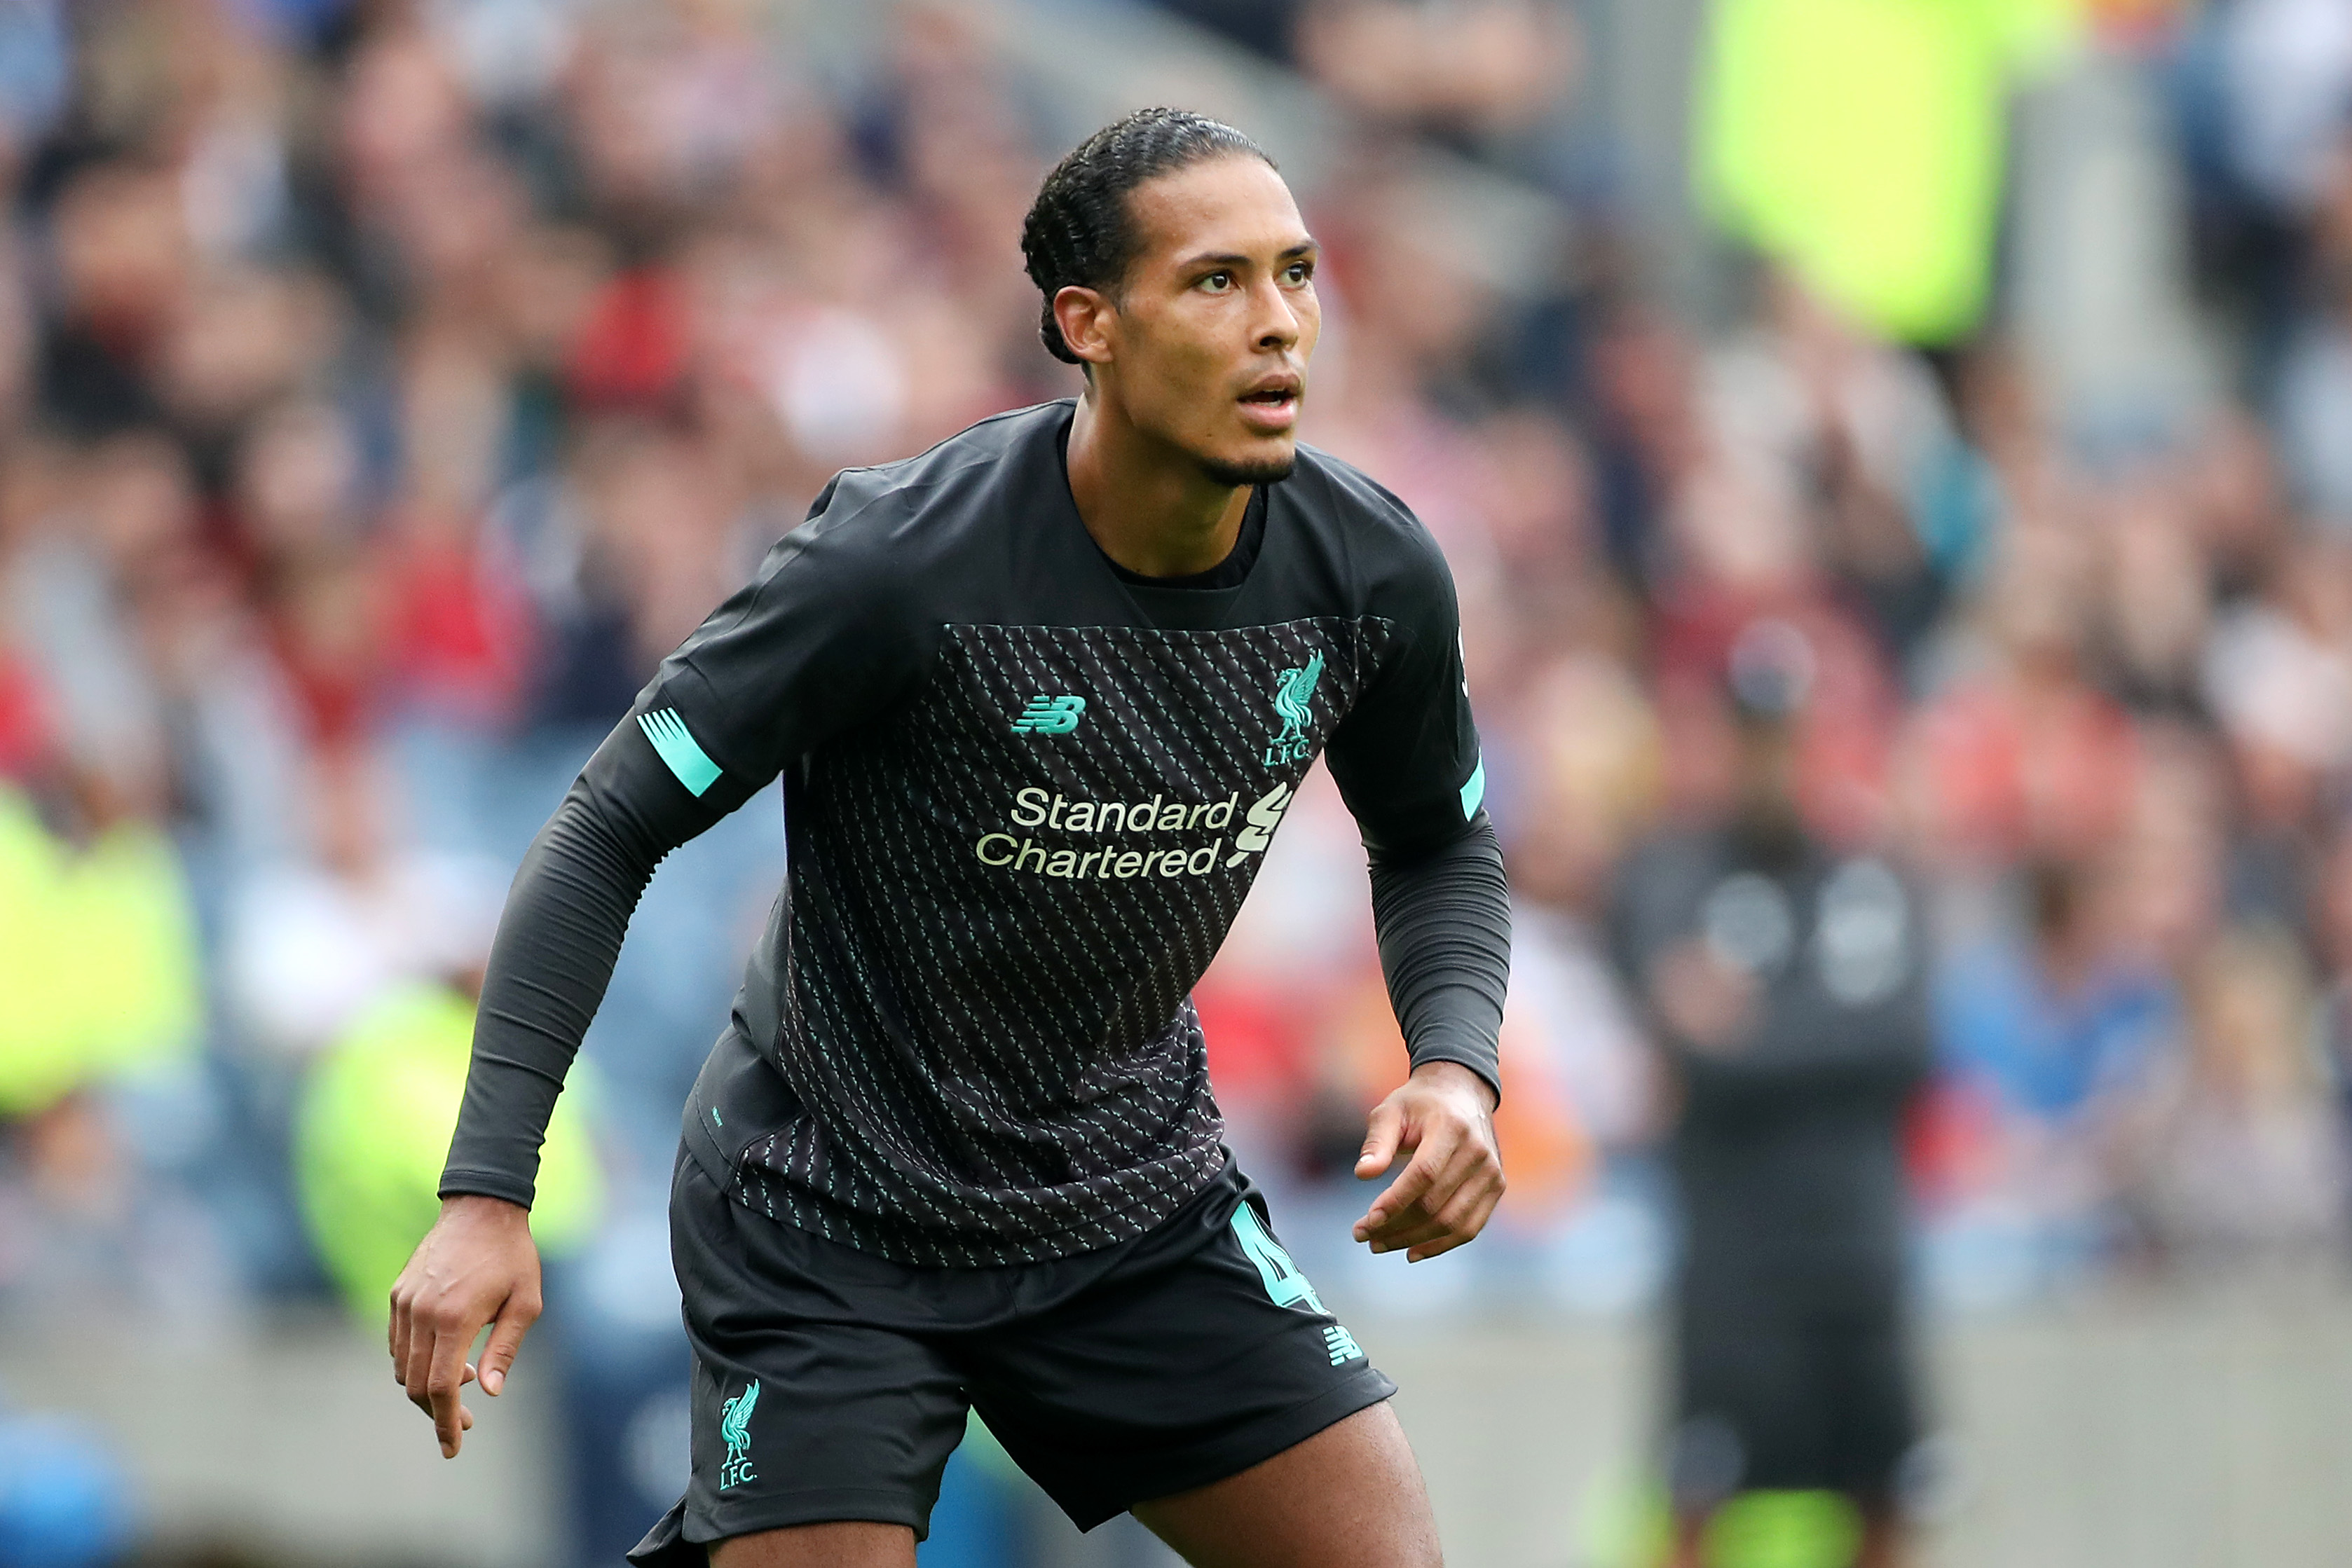 EDINBURGH, SCOTLAND - JULY 28: Virgil Van Dijk of Liverpool looks on during the Pre-Season Friendly match between Liverpool FC and SSC Napoli at Murrayfield on July 28, 2019 in Edinburgh, Scotland. (Photo by Ian MacNicol/Getty Images)